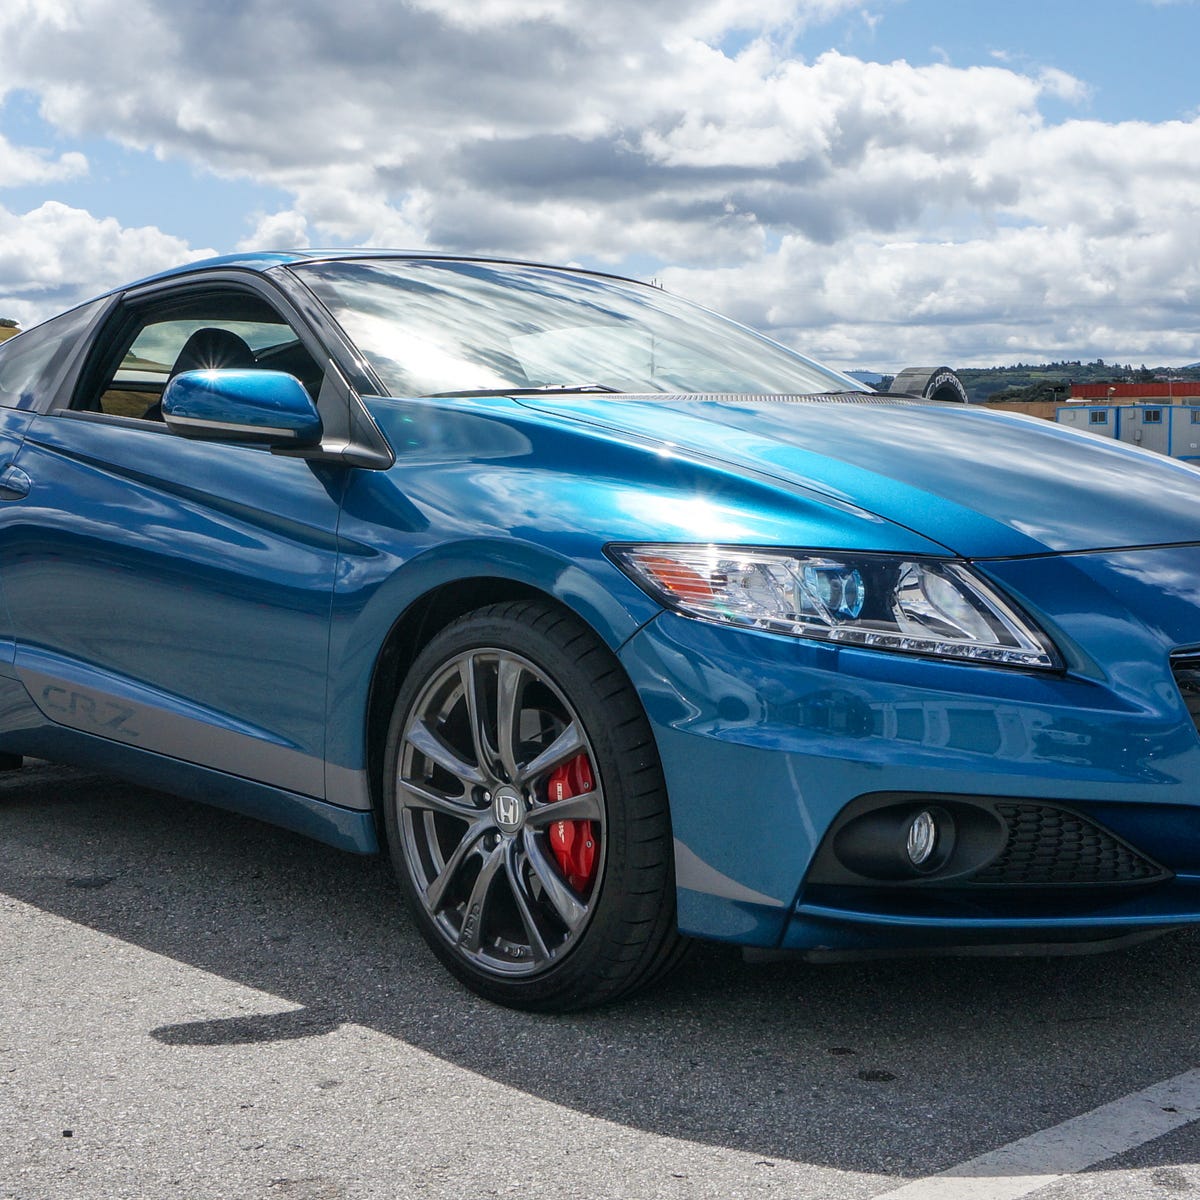 From cute hybrid to hot hatch: Trackside with the HPD supercharged